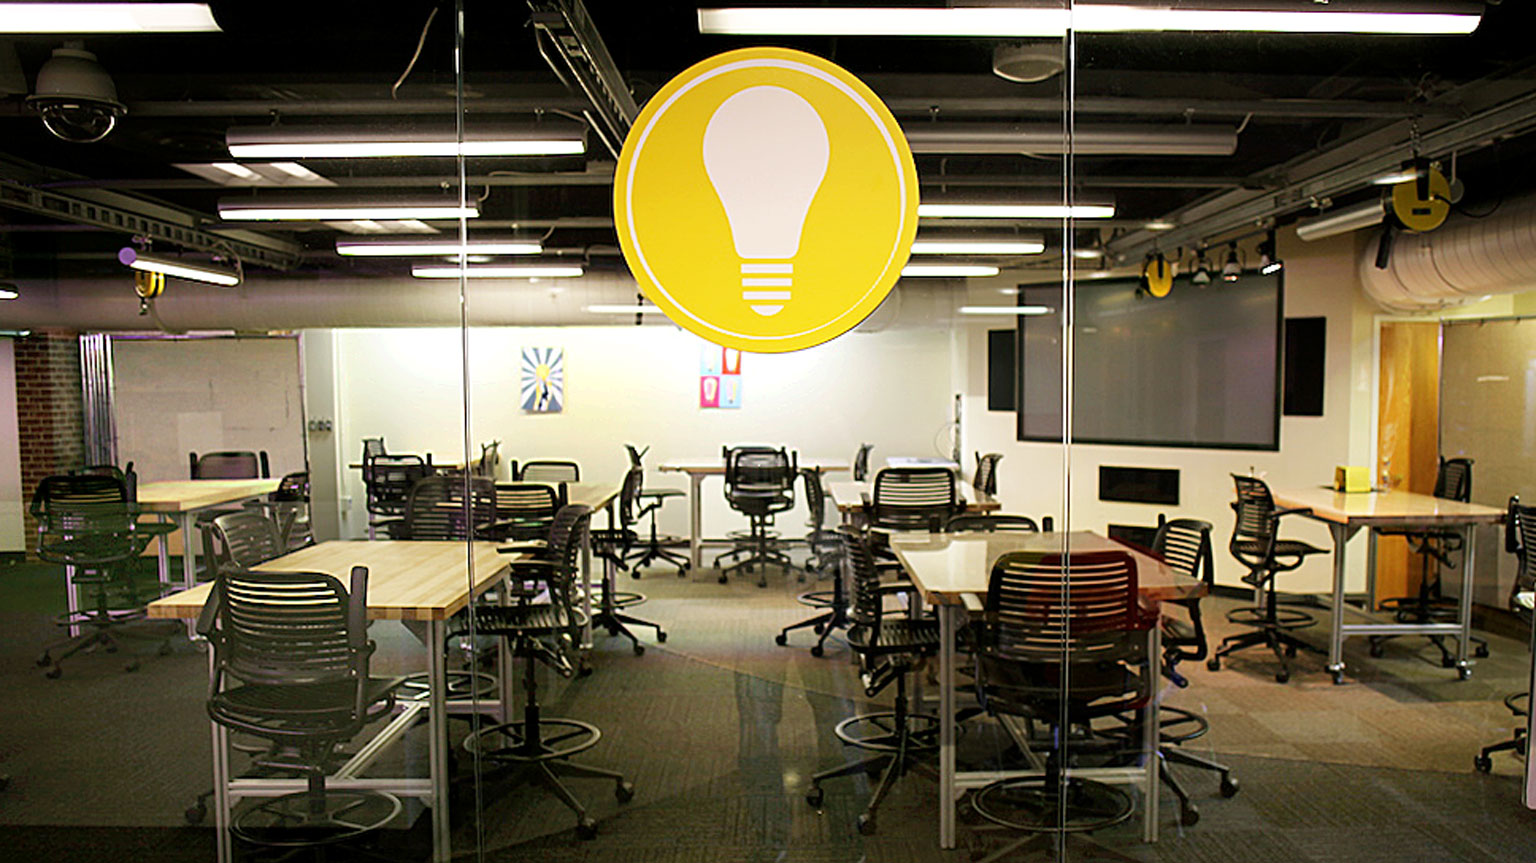 A view of a classroom full of adaptable rolling furniture and a large icon of a yellow lightbulb on the glass wall in center-screen.